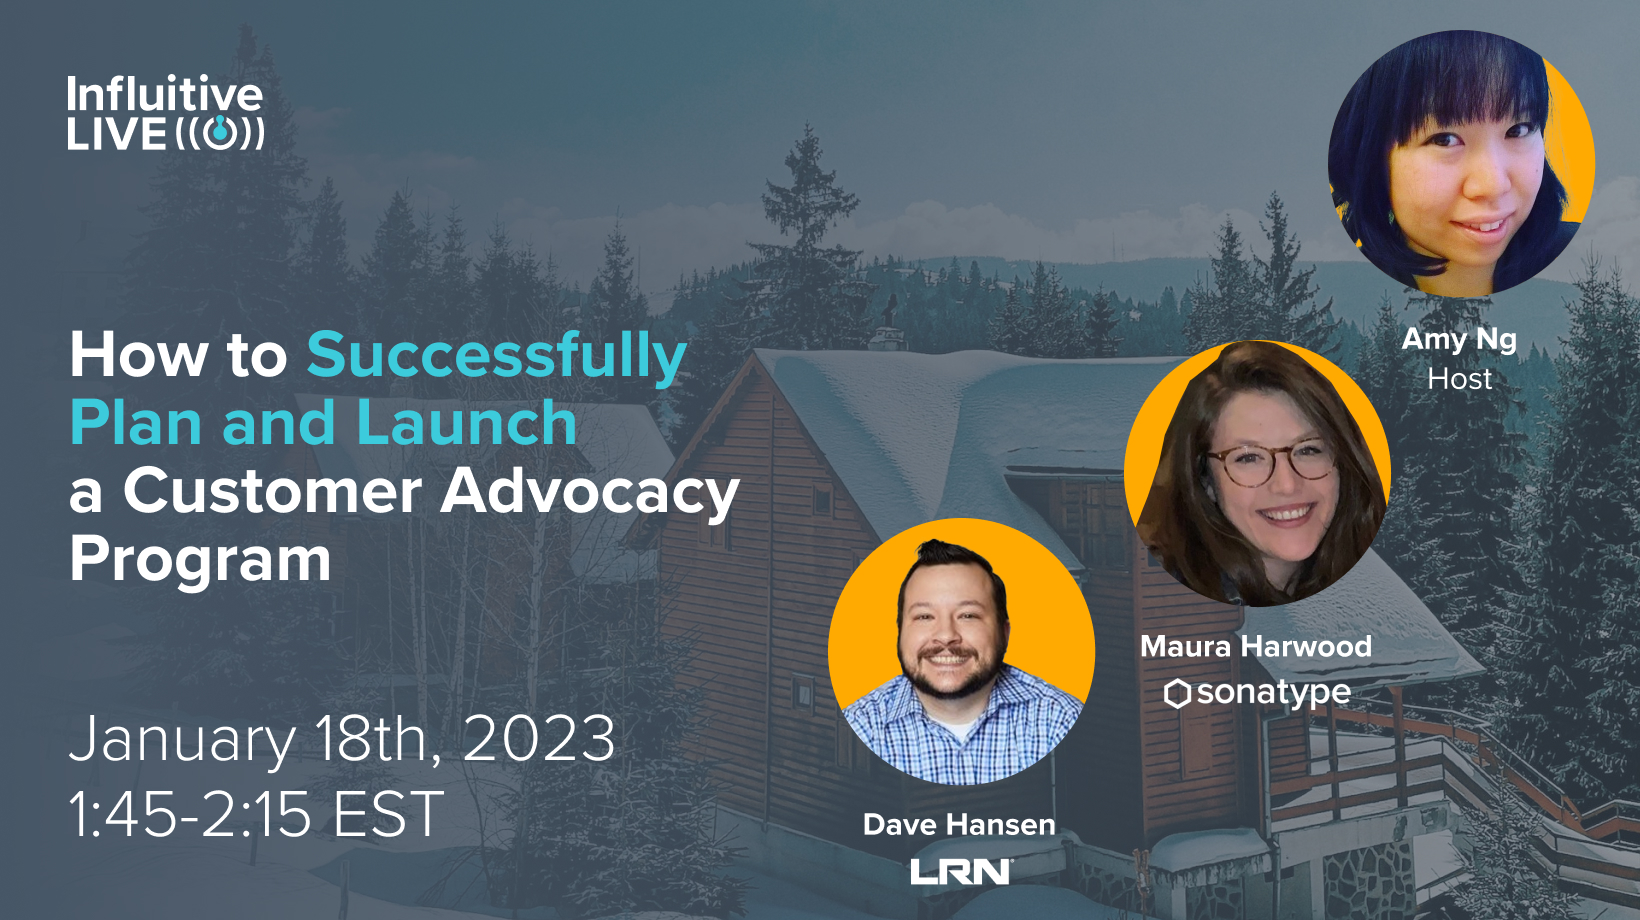 "How to Successfully Launch a Customer Advocacy Program<br />– Amy Ng (Influitive), Dave Hansen (LRN), Maura Harwood (Sonatype)"